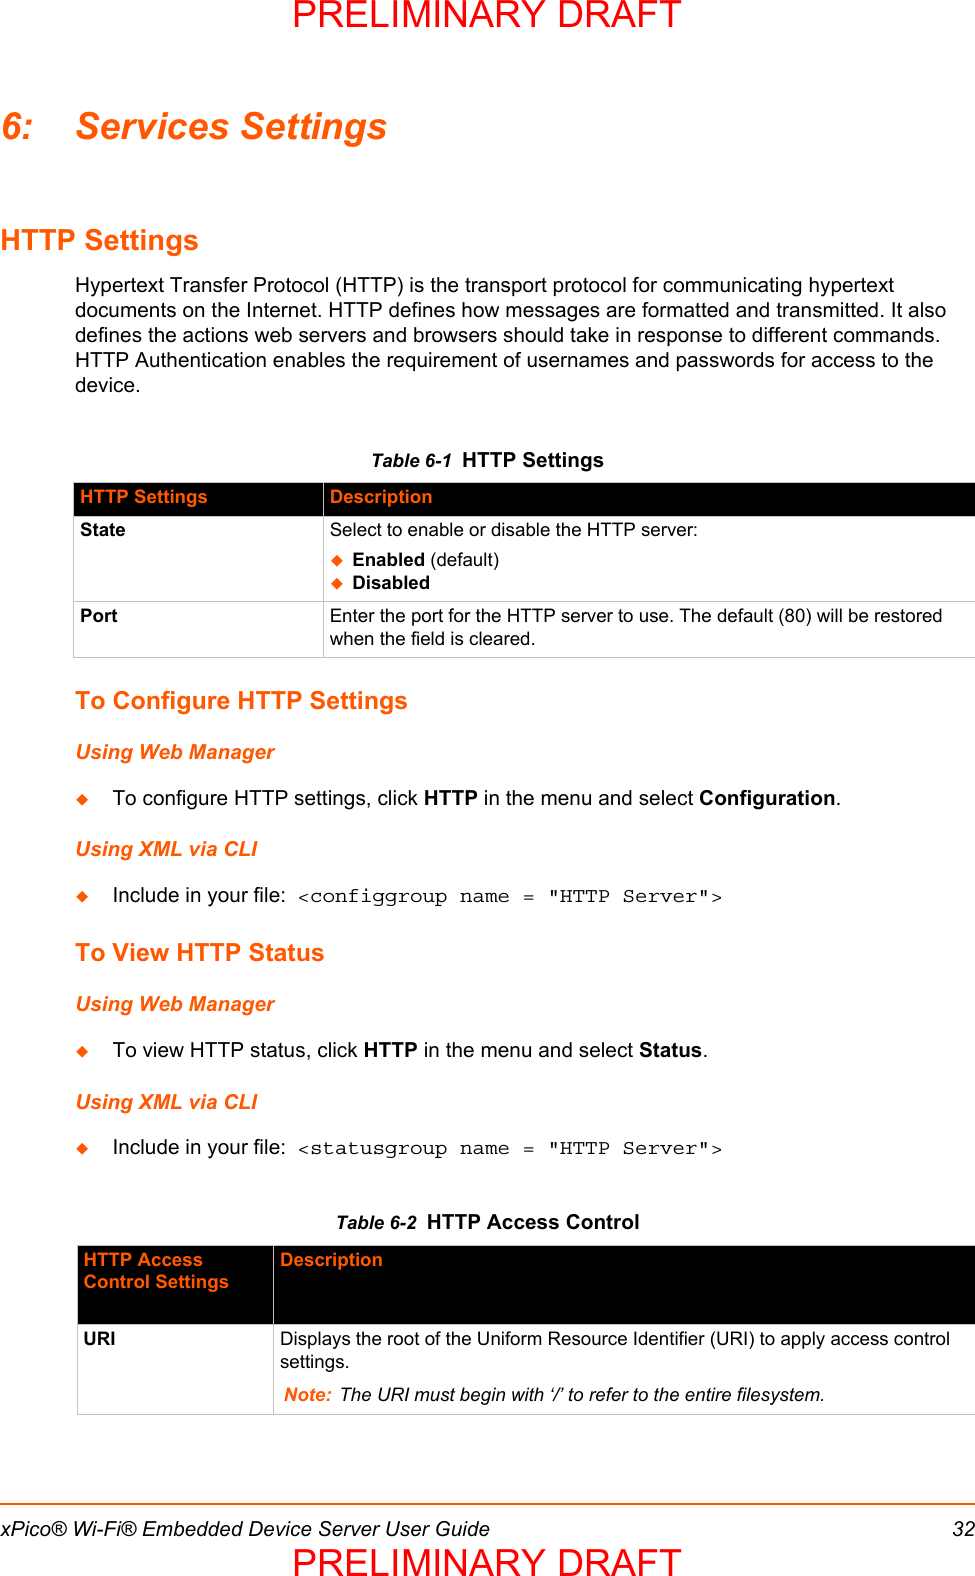 xPico® Wi-Fi® Embedded Device Server User Guide 326: Services SettingsHTTP SettingsHypertext Transfer Protocol (HTTP) is the transport protocol for communicating hypertext documents on the Internet. HTTP defines how messages are formatted and transmitted. It also defines the actions web servers and browsers should take in response to different commands.  HTTP Authentication enables the requirement of usernames and passwords for access to the  device. Table 6-1  HTTP SettingsTo Configure HTTP SettingsUsing Web ManagerTo configure HTTP settings, click HTTP in the menu and select Configuration.Using XML via CLIInclude in your file:  &lt;configgroup name = &quot;HTTP Server&quot;&gt;To View HTTP StatusUsing Web ManagerTo view HTTP status, click HTTP in the menu and select Status.Using XML via CLIInclude in your file:  &lt;statusgroup name = &quot;HTTP Server&quot;&gt;Table 6-2  HTTP Access ControlHTTP Settings DescriptionState Select to enable or disable the HTTP server:Enabled (default)DisabledPort Enter the port for the HTTP server to use. The default (80) will be restored when the field is cleared.HTTP Access Control SettingsDescriptionURI Displays the root of the Uniform Resource Identifier (URI) to apply access control settings.Note: The URI must begin with ‘/’ to refer to the entire filesystem.PRELIMINARY DRAFTPRELIMINARY DRAFT